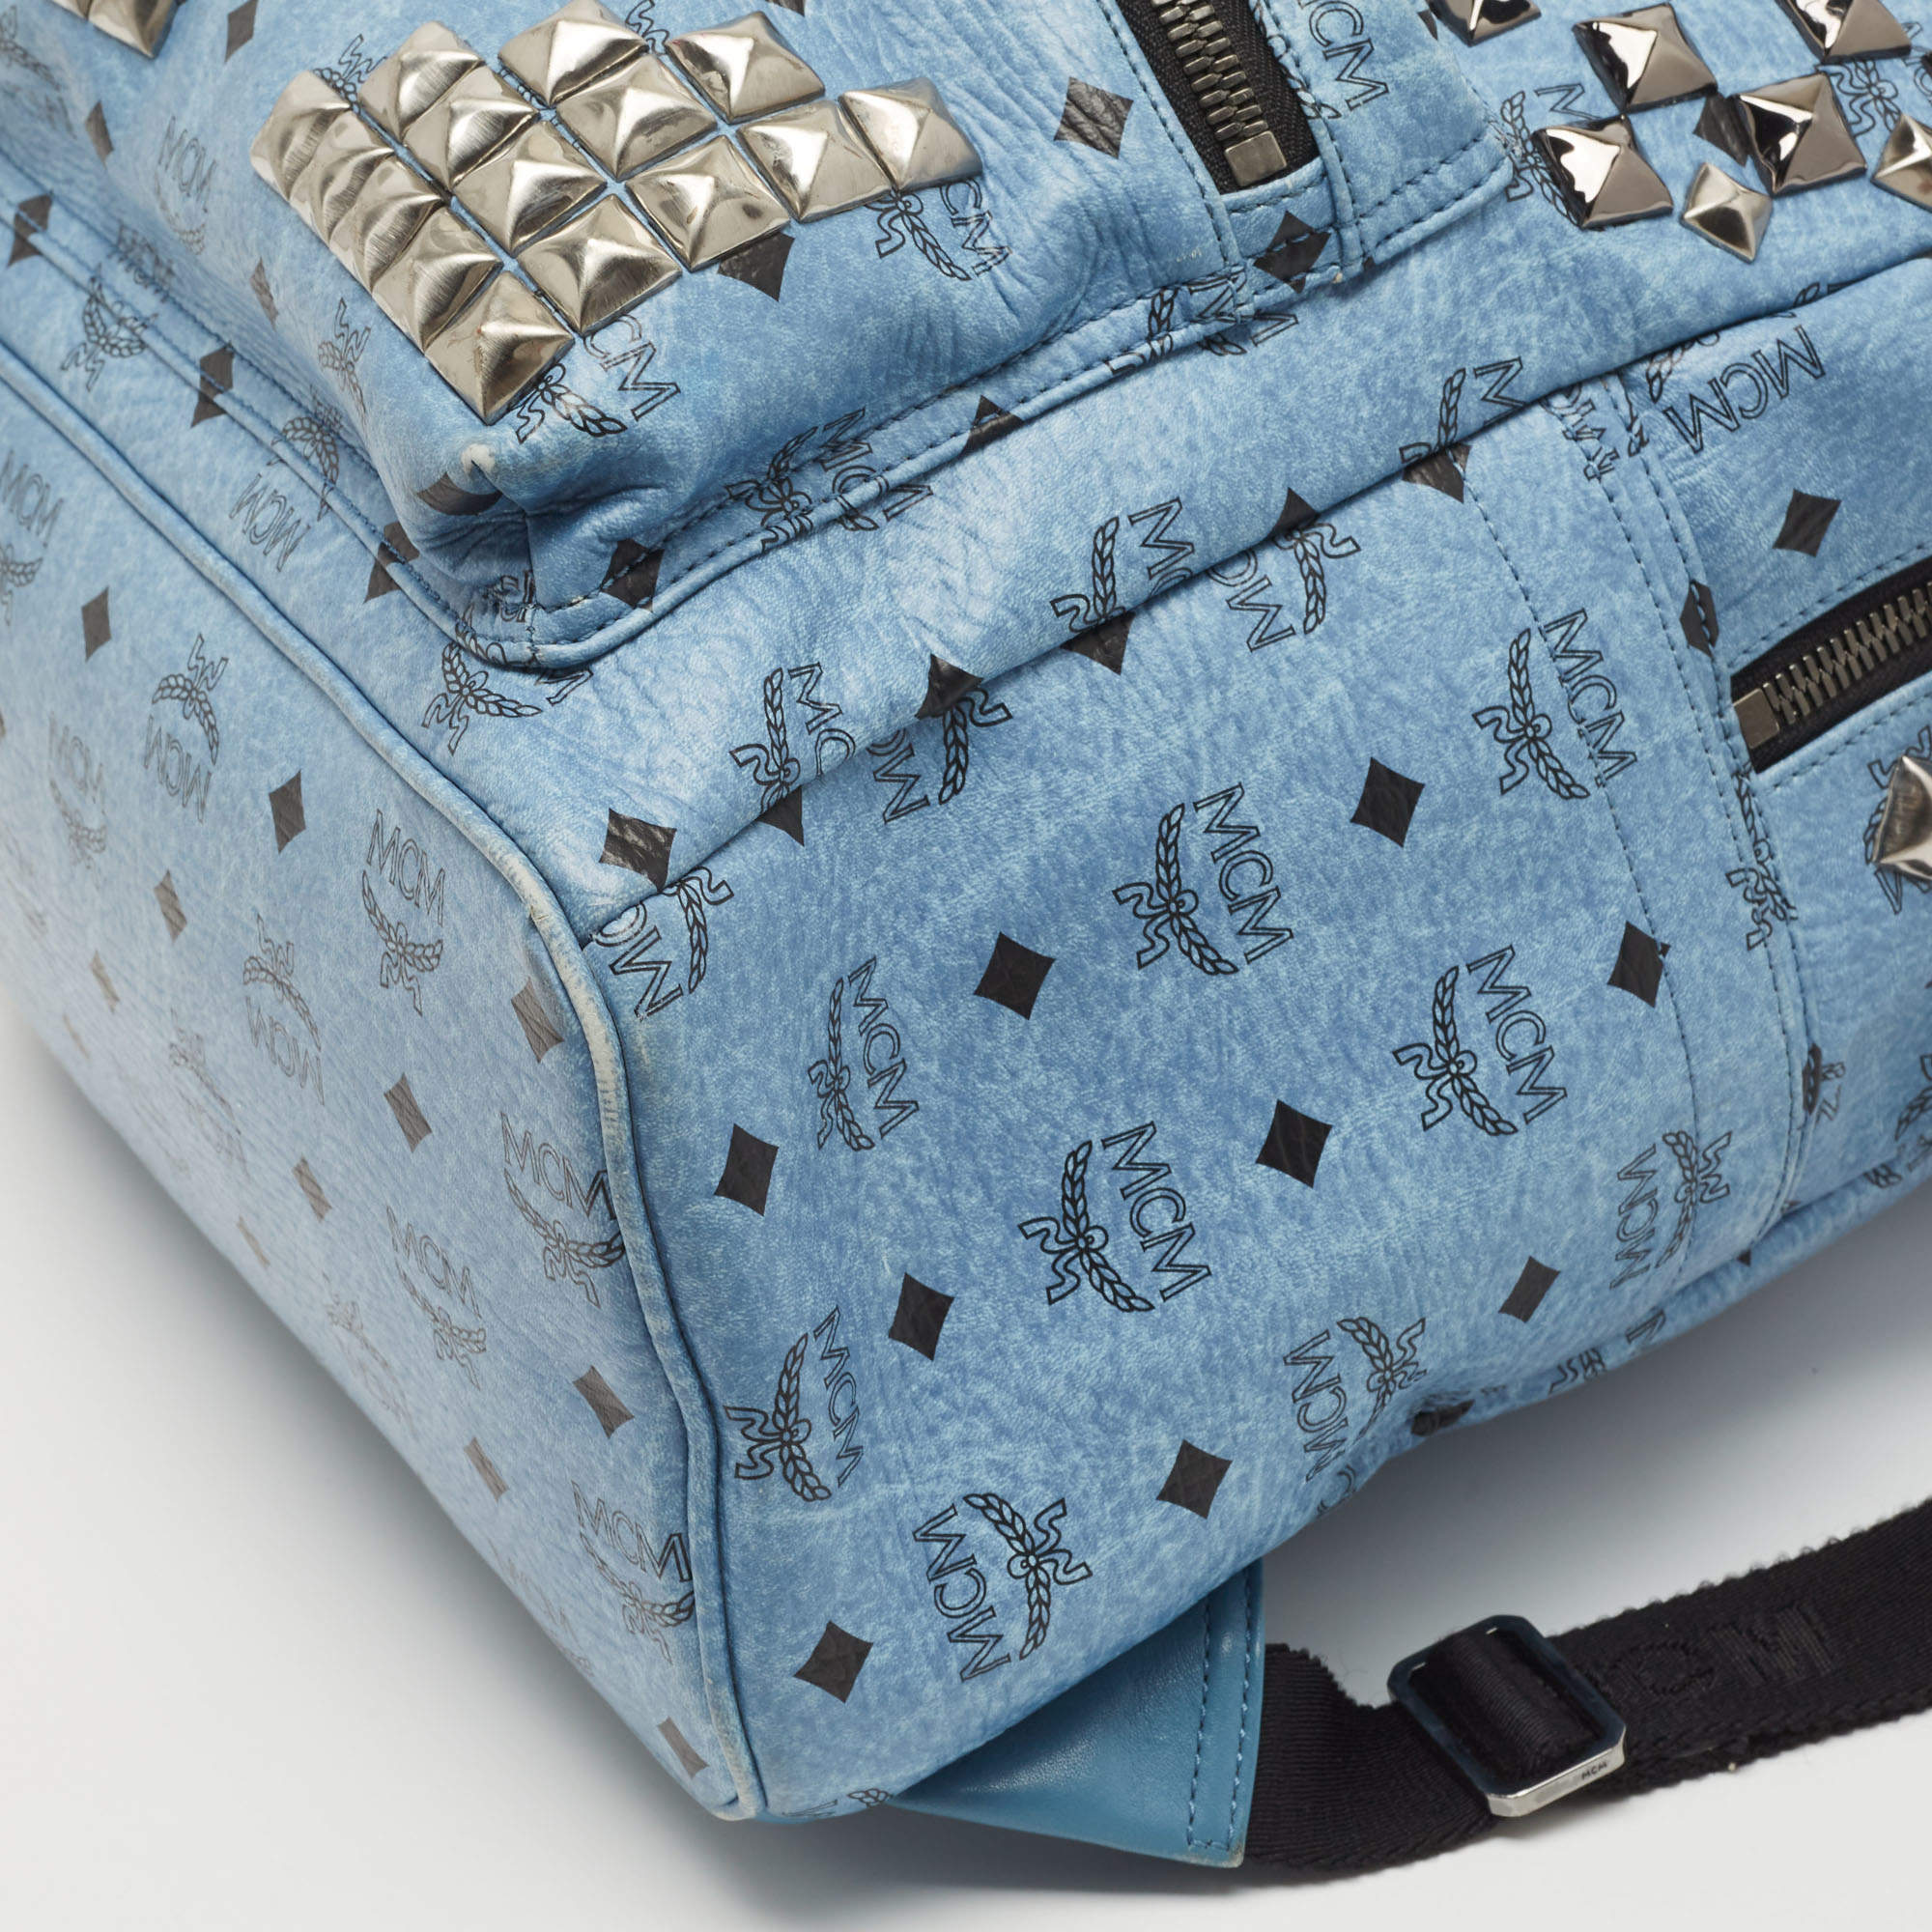 MCM Light Blue Visetos Coated Canvas and Leather Studs Backpack MCM | The  Luxury Closet